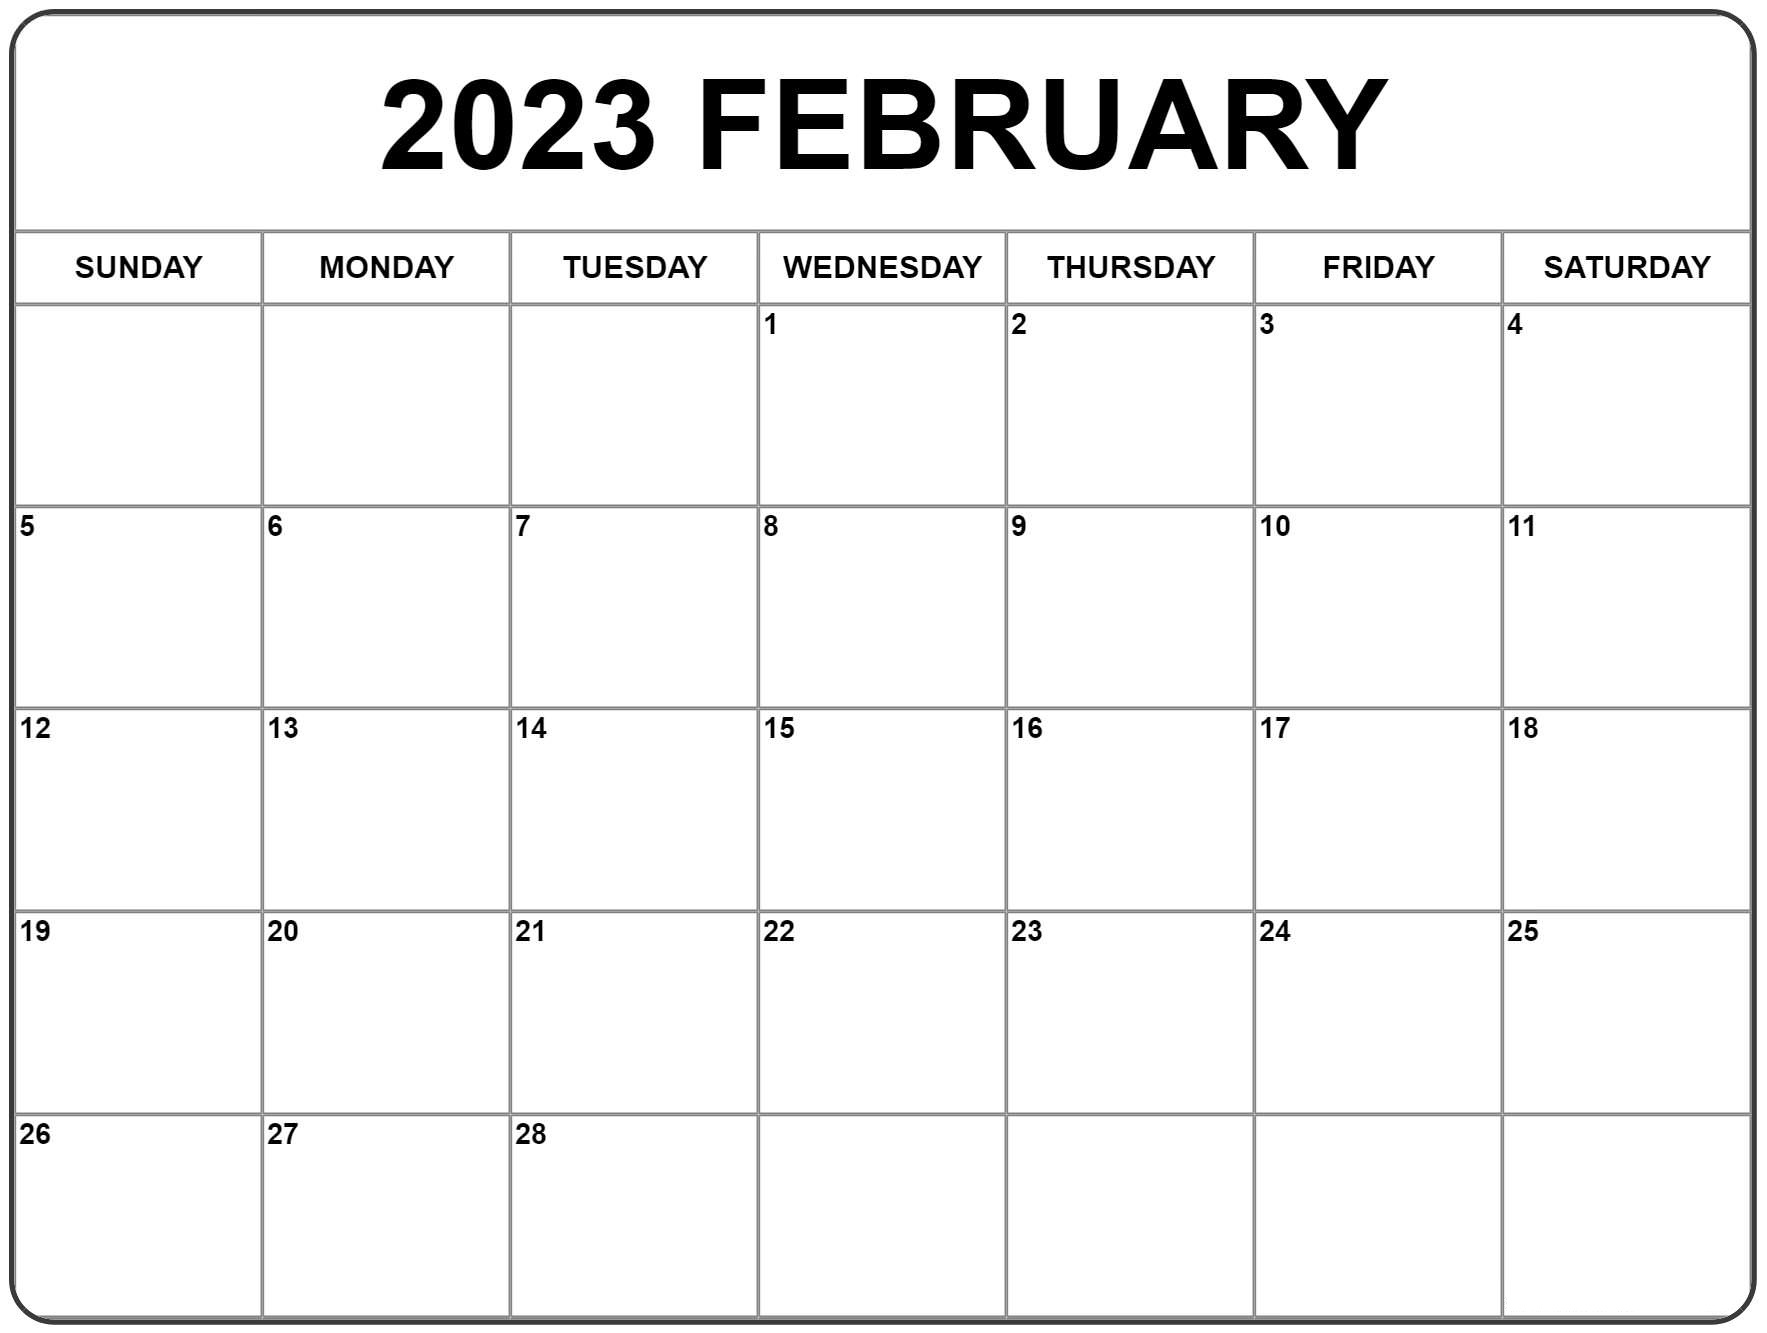 Blank February 2023 Calendar - Organize Your Appointments